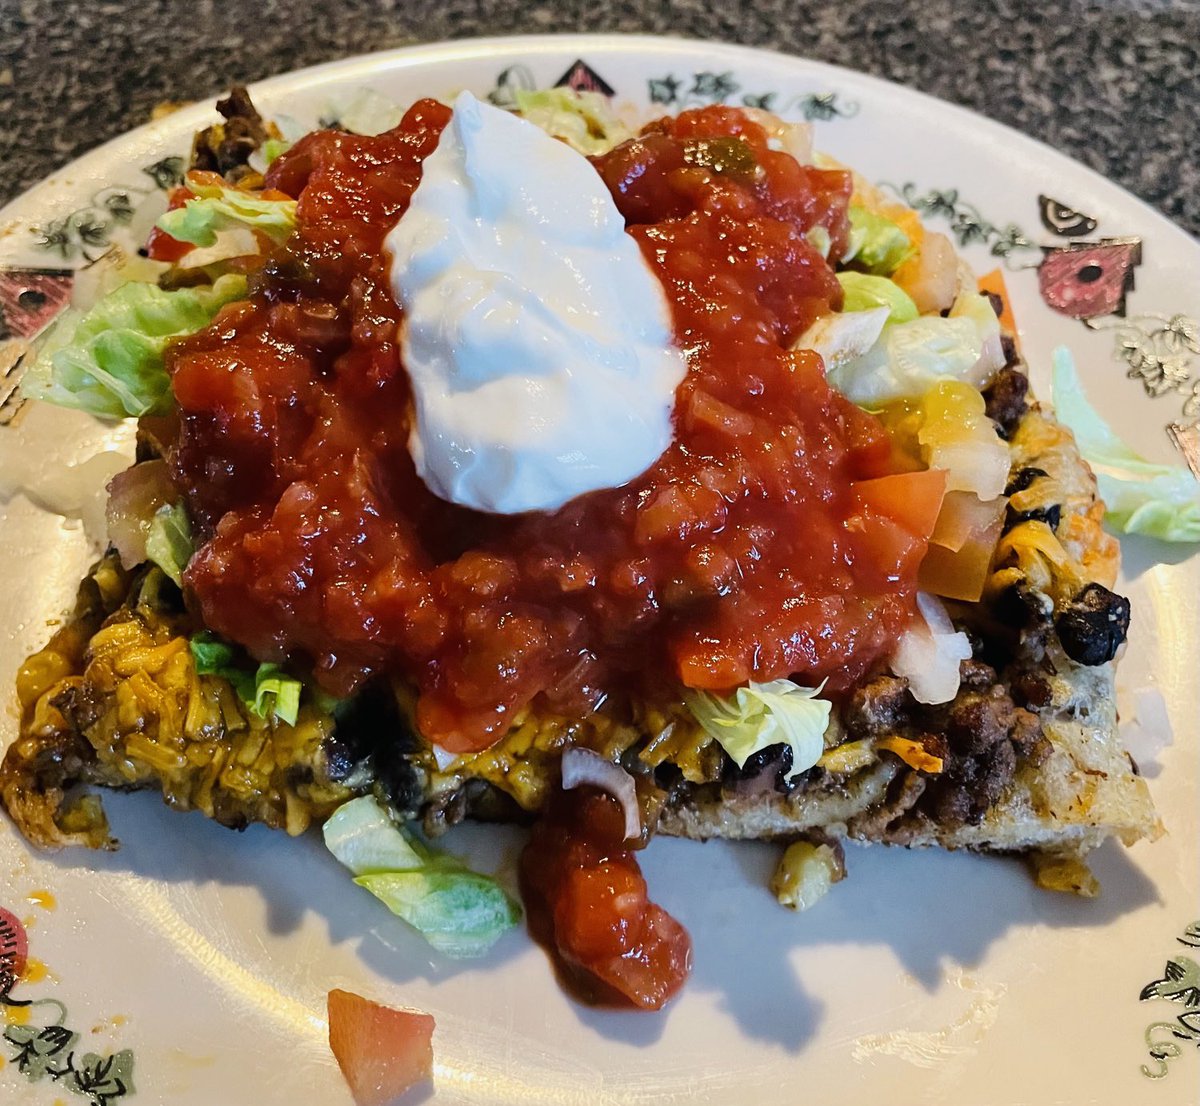 Taco pizza… night you savage patriots, vets.. so proud of you, you don’t quit! ♥️🤍💙🇺🇸✝️